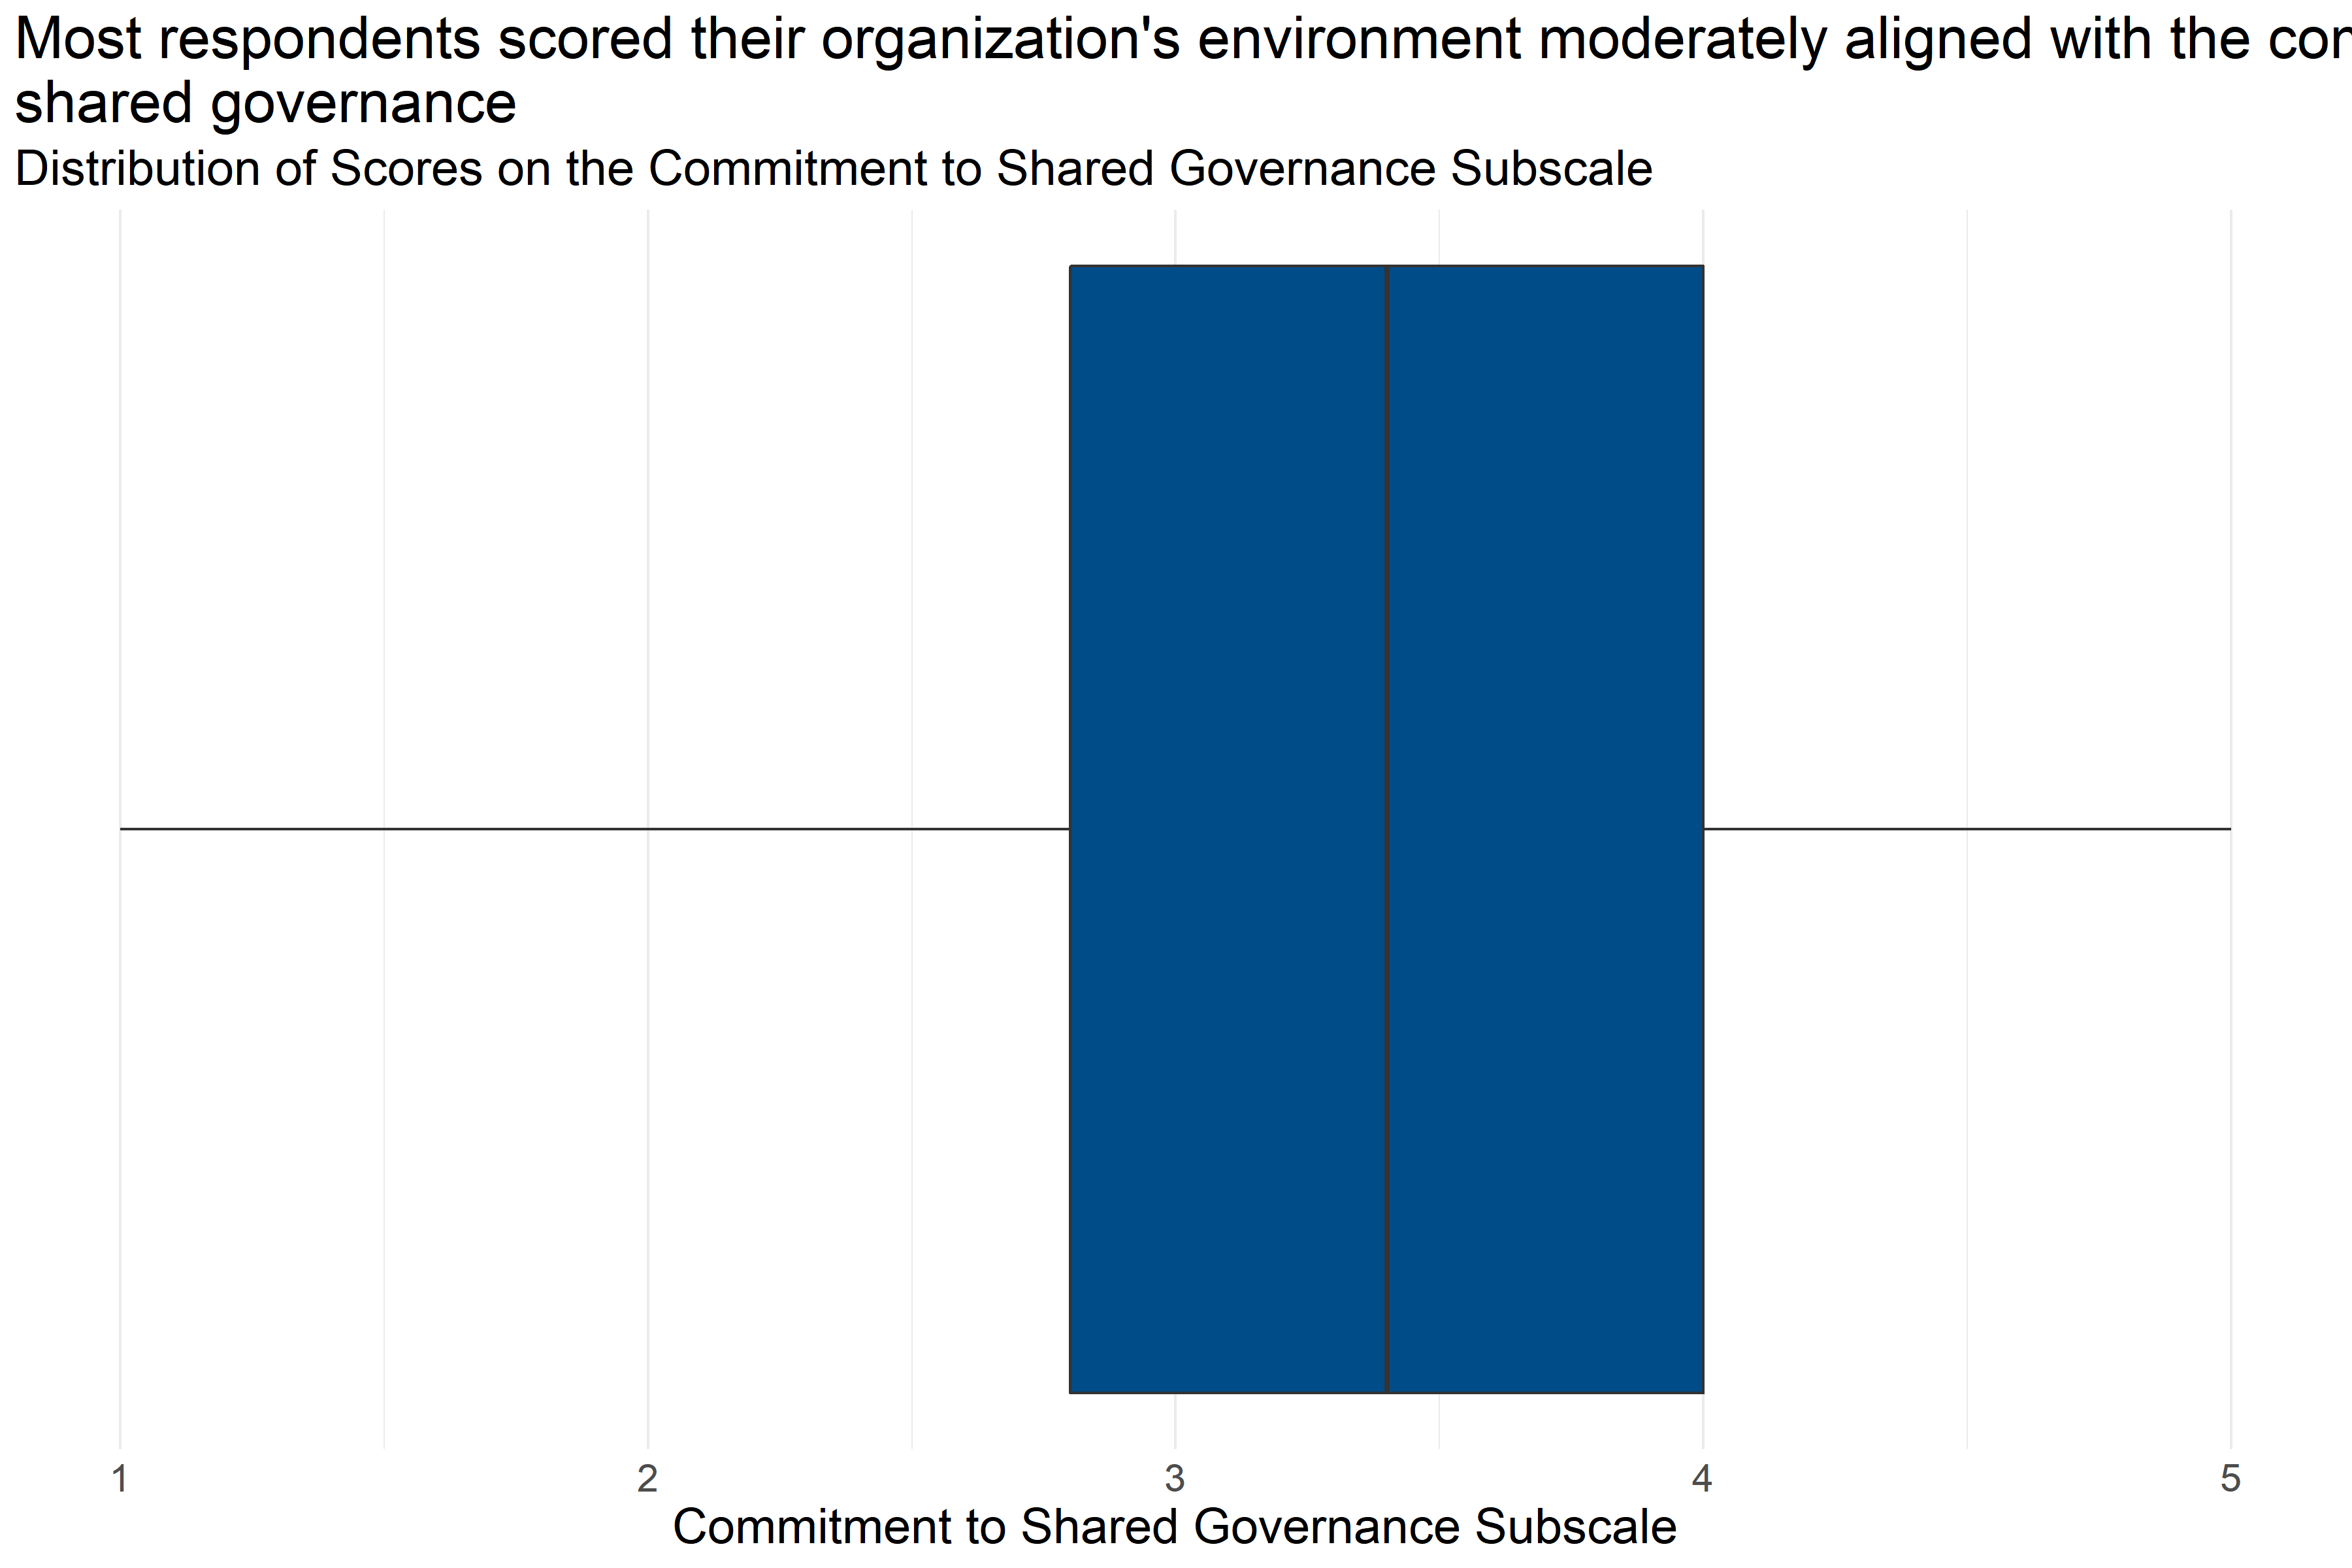 Boxplot of score distributions for Commitment to Shared Governance Subscale